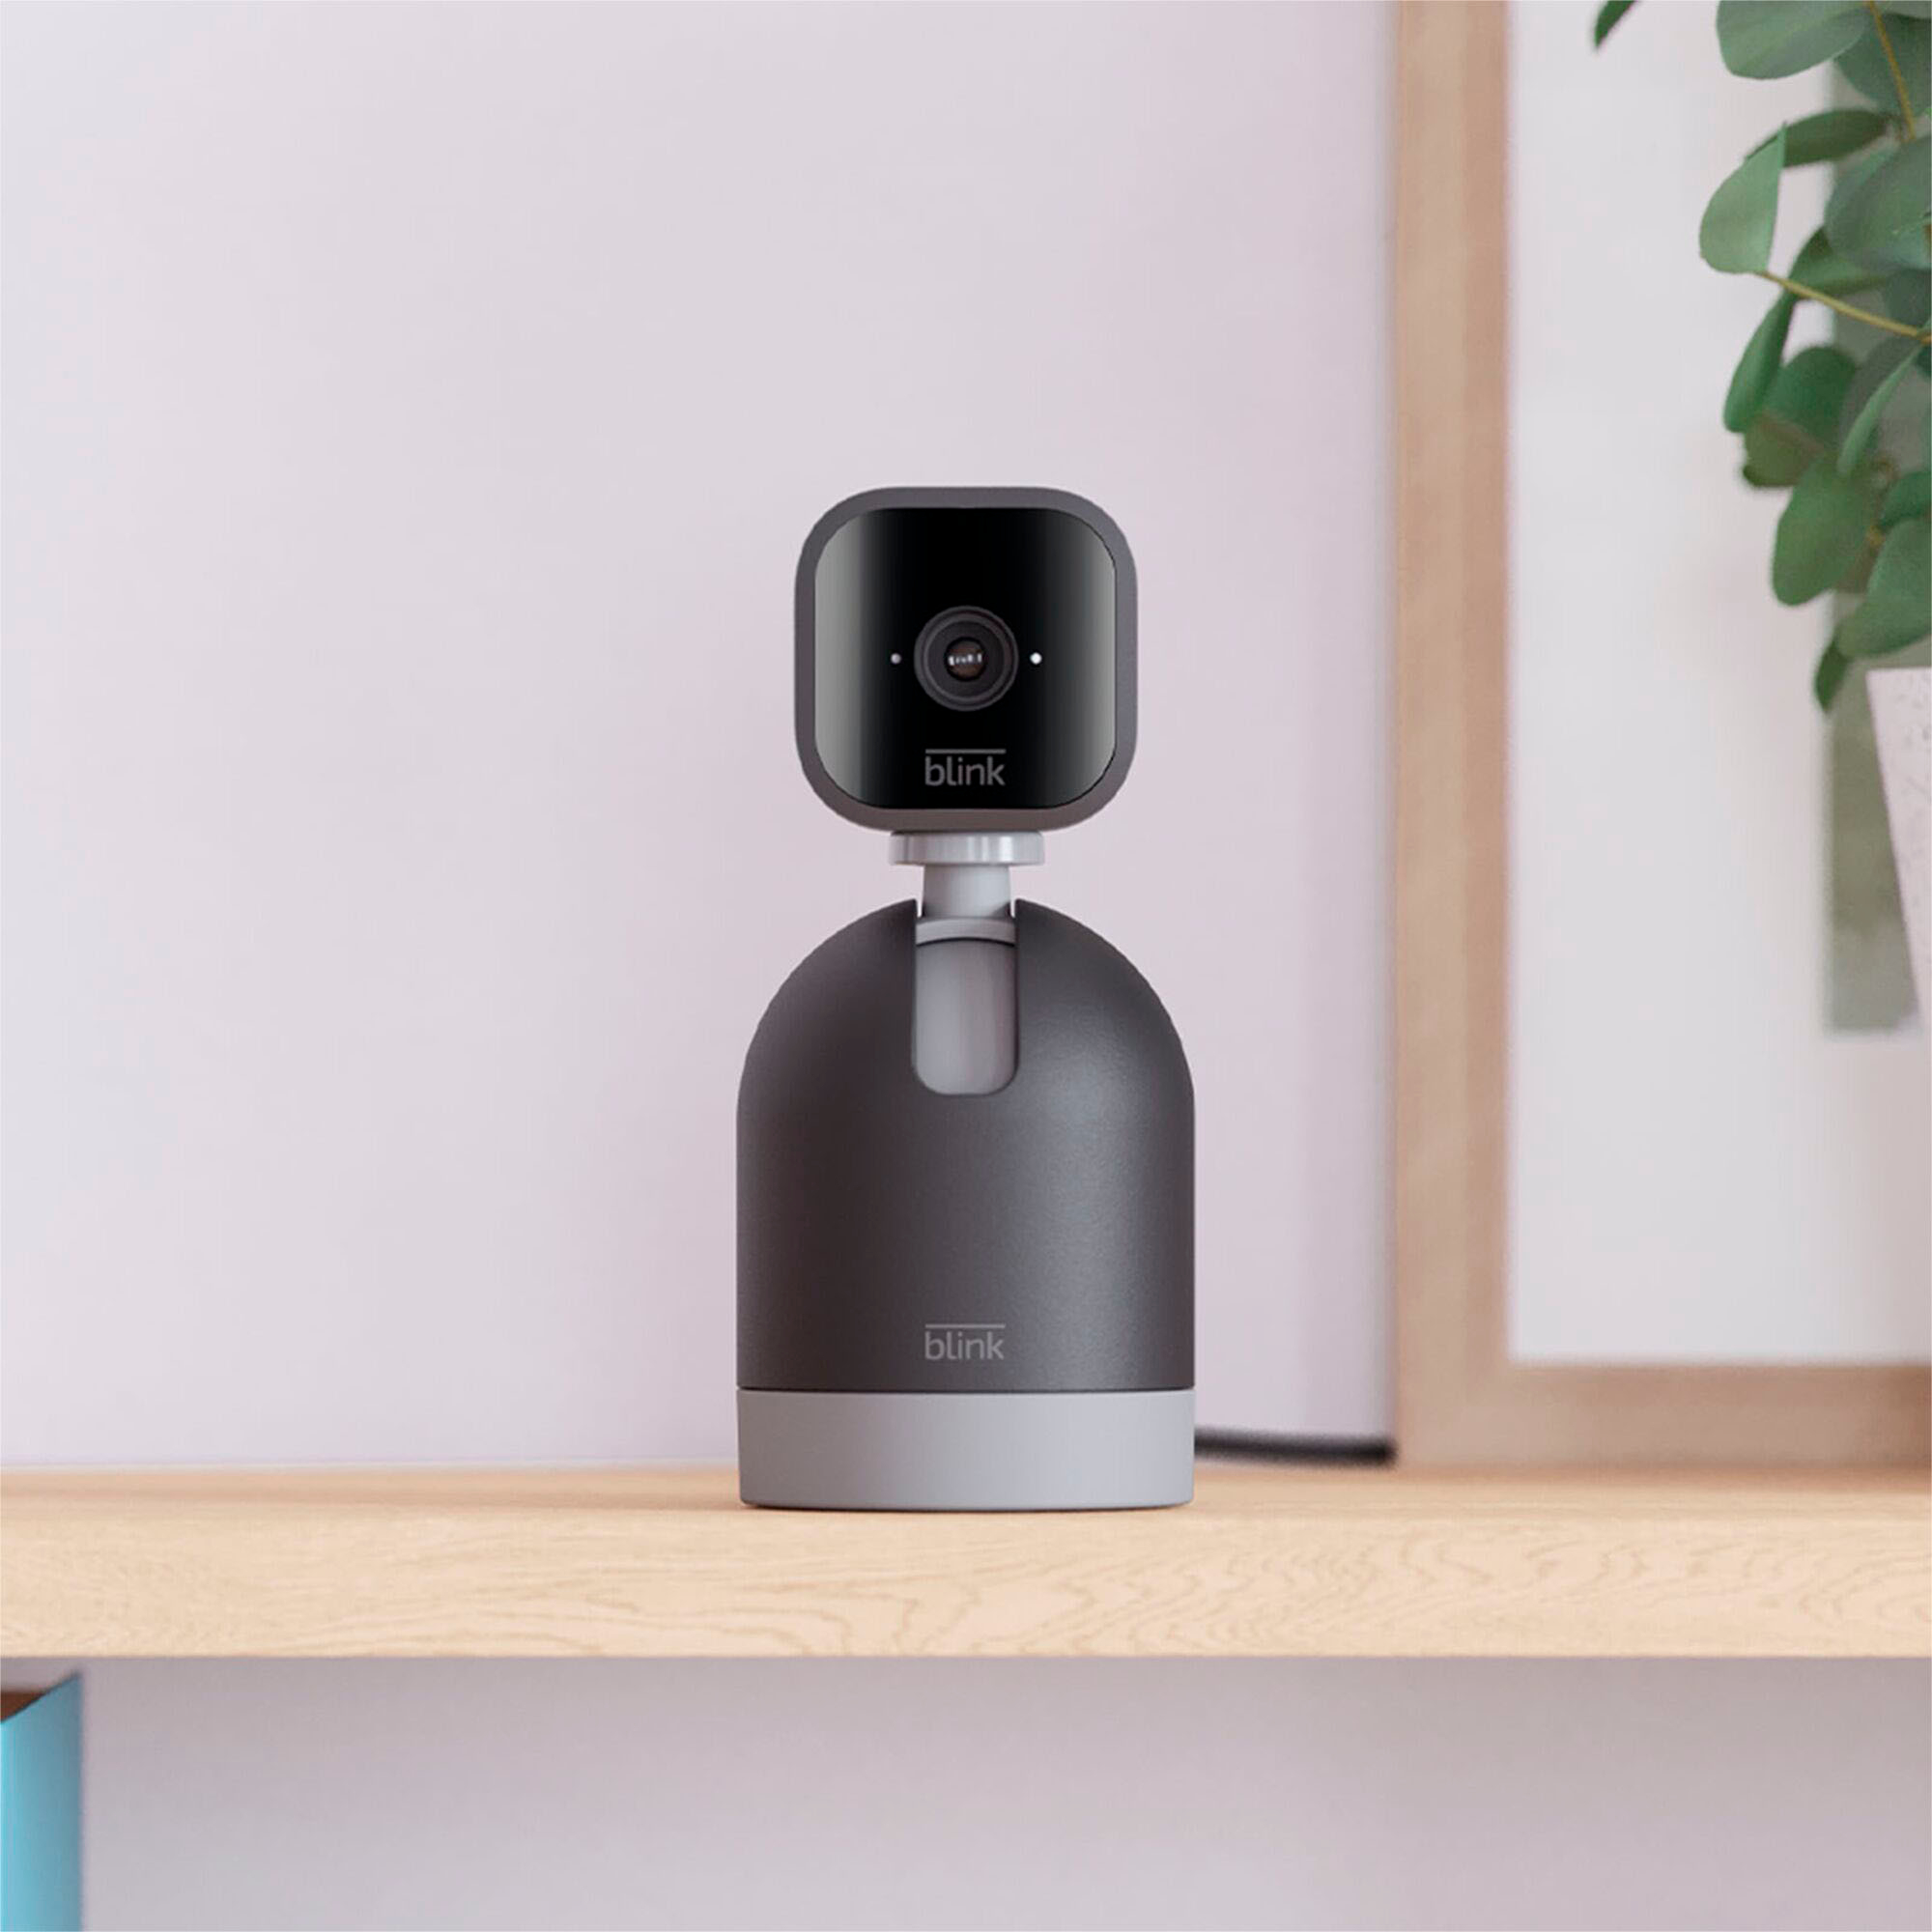 Prime Members Can Snag 4 Blink Mini Security Cameras for Just $15 Each -  CNET